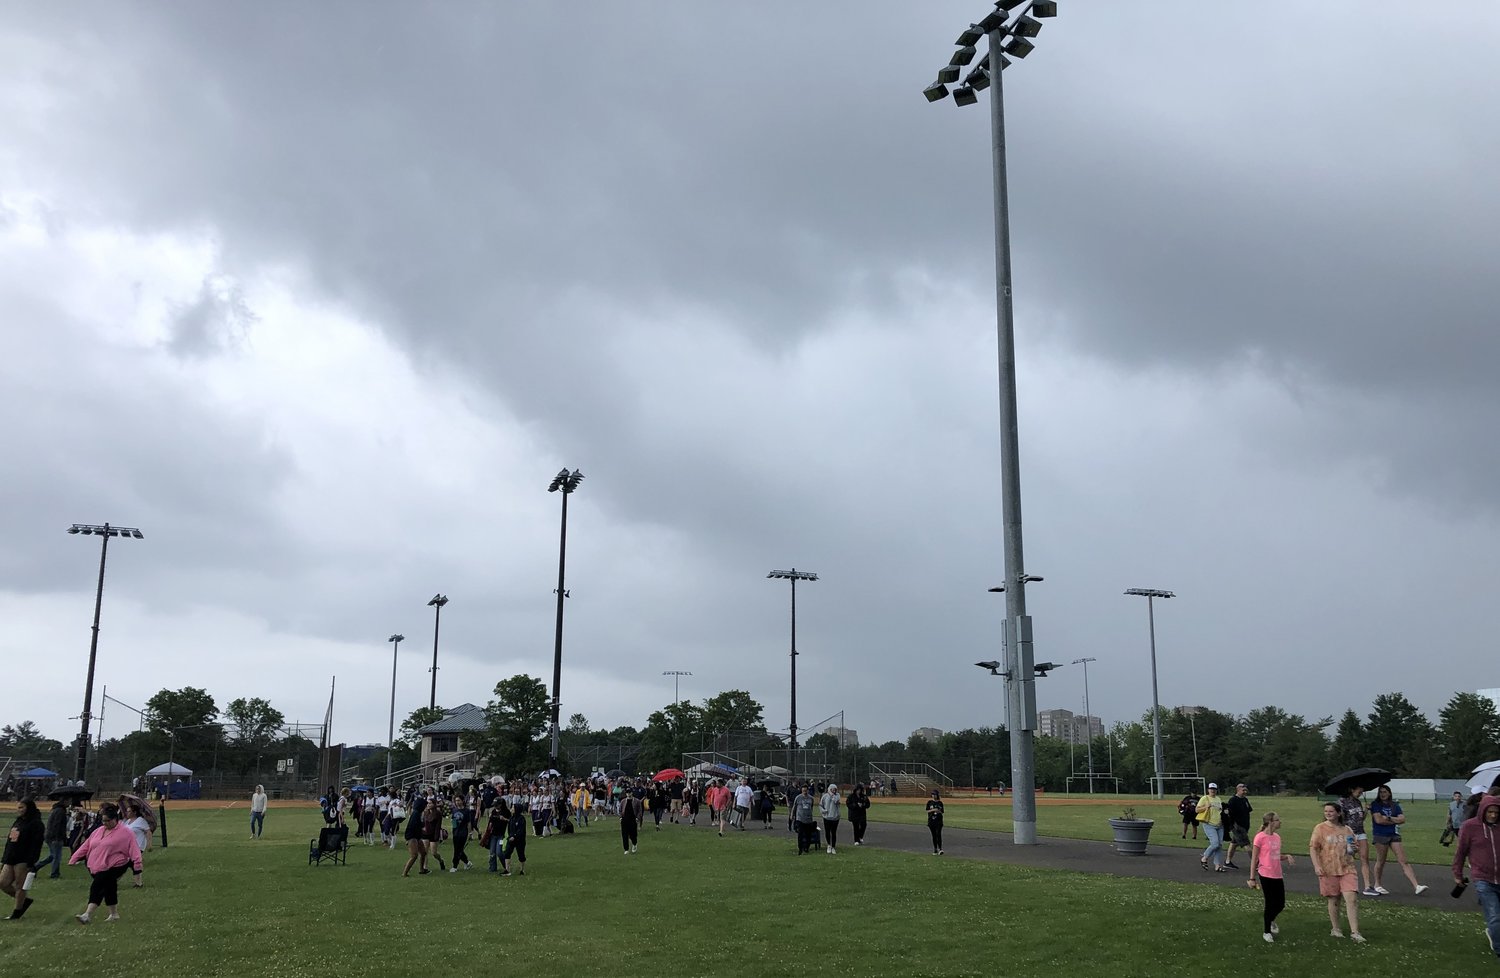 Spectators headed for the exit Saturday at Mitchel Athletic Complex as severe weather forced the Nassau H.S. softball championships to postpone to Sunday.